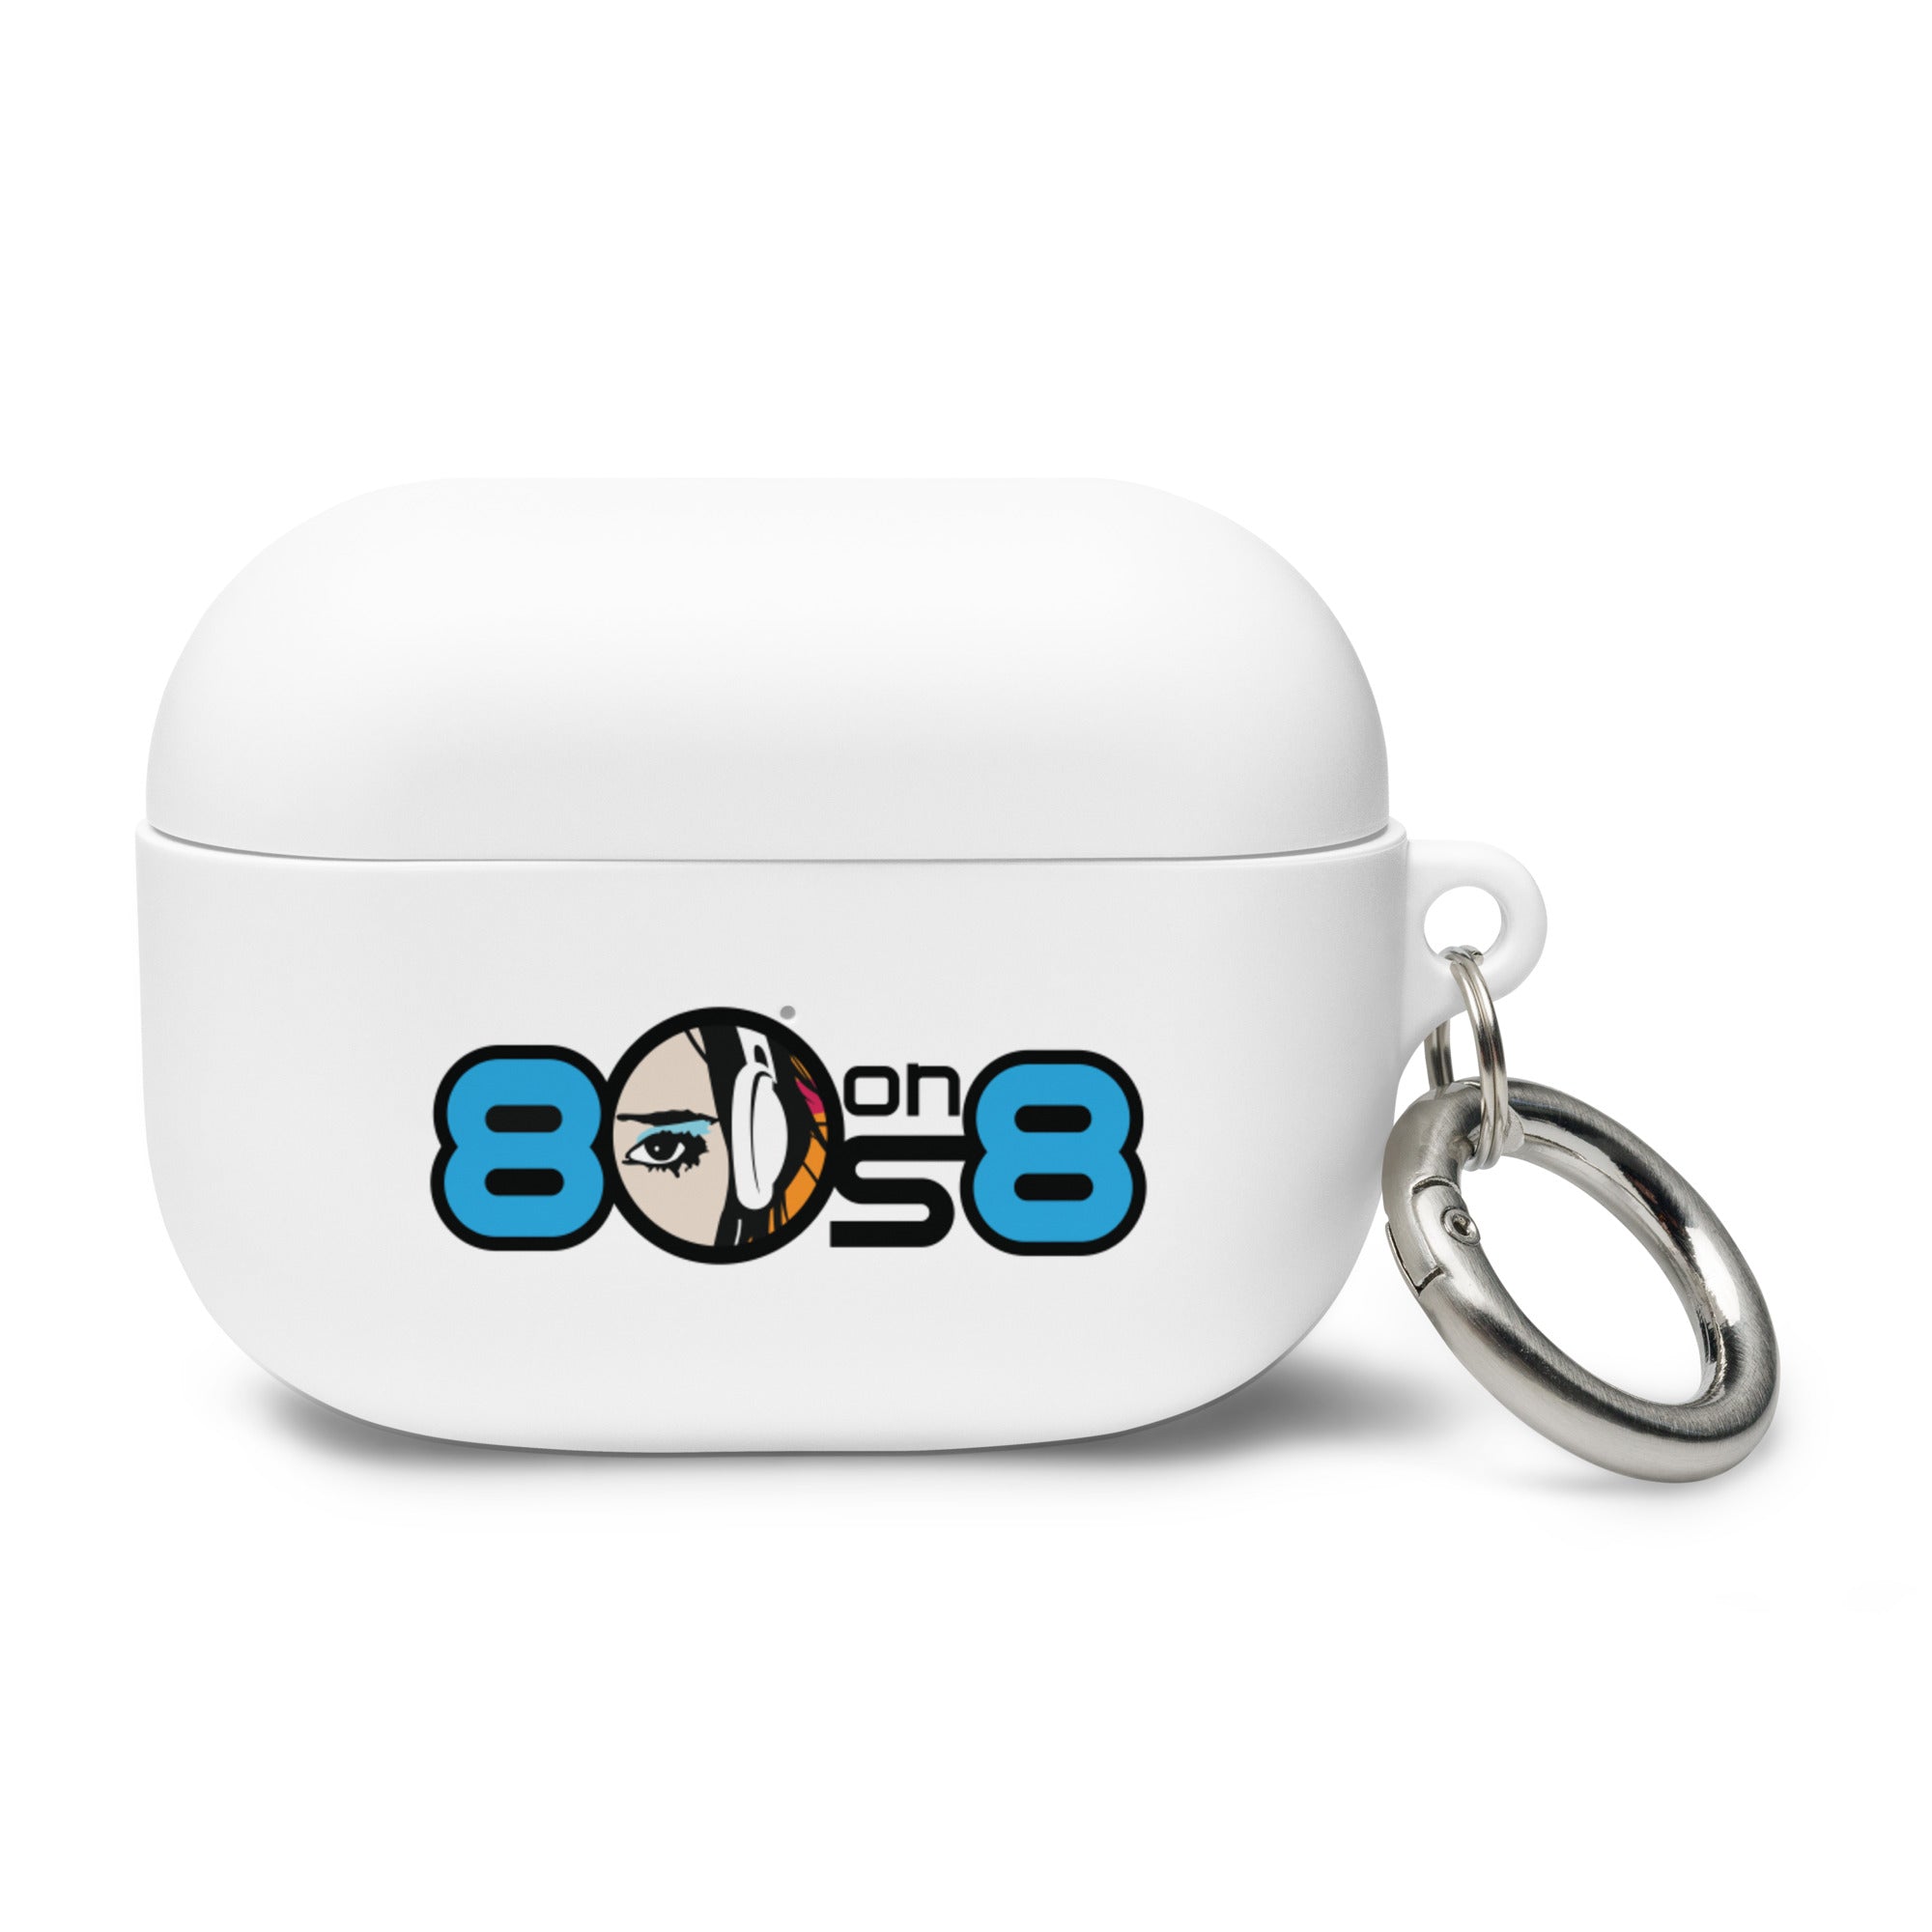 80s on 8: AirPods® Case Cover